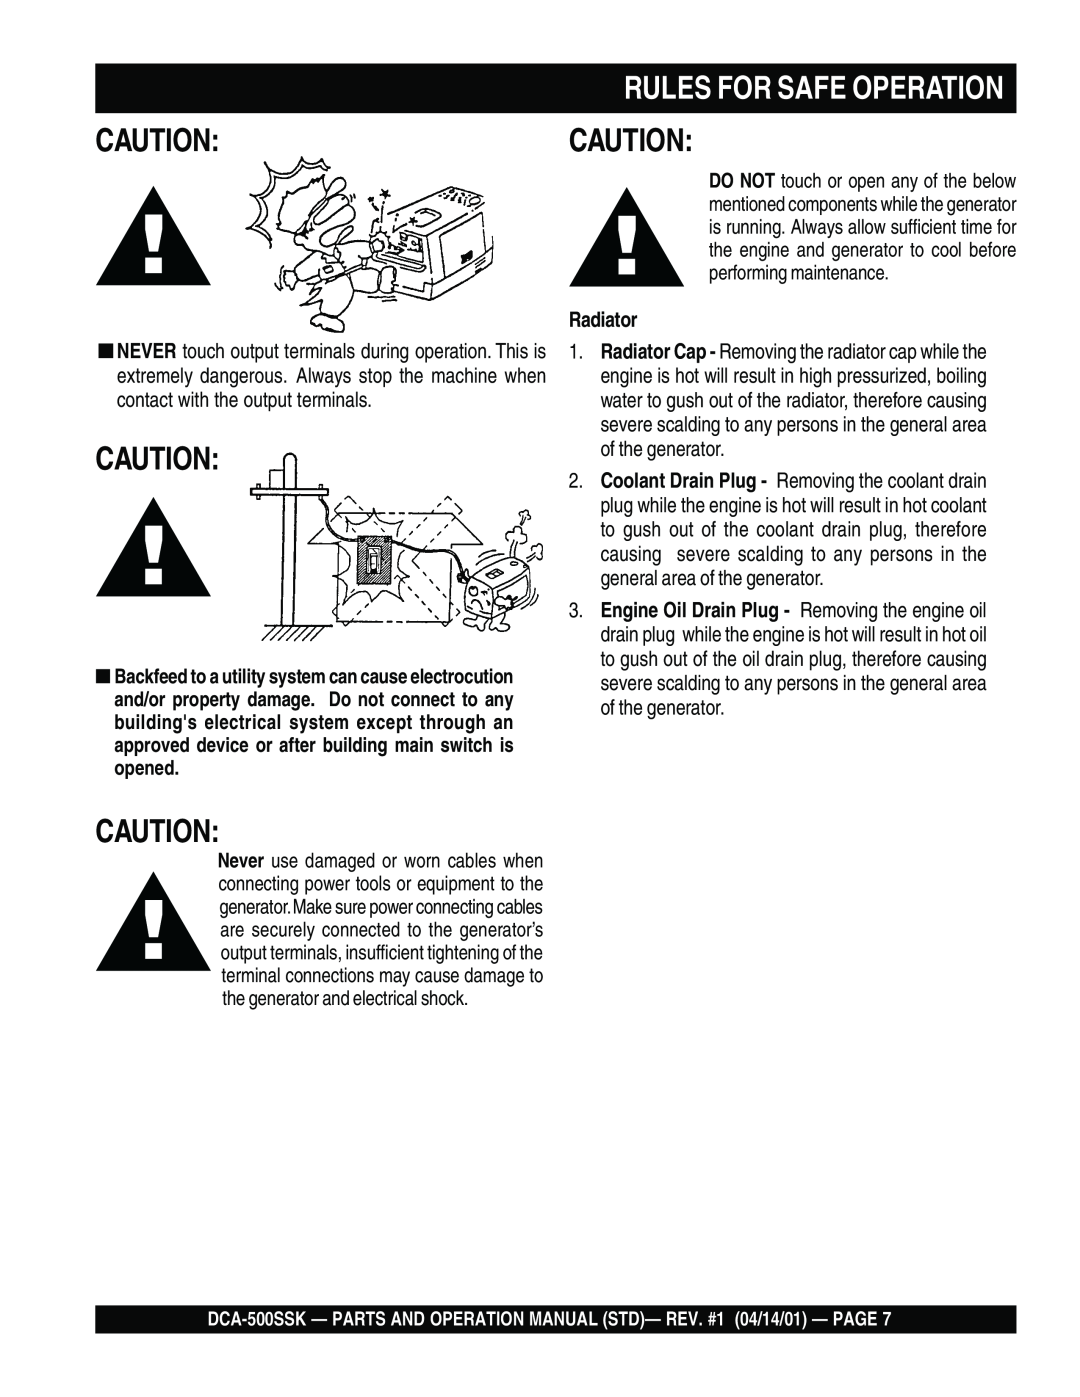 Multiquip DCA-500SSK operation manual Radiator, Rules For Safe Operation, Cautioncaution 